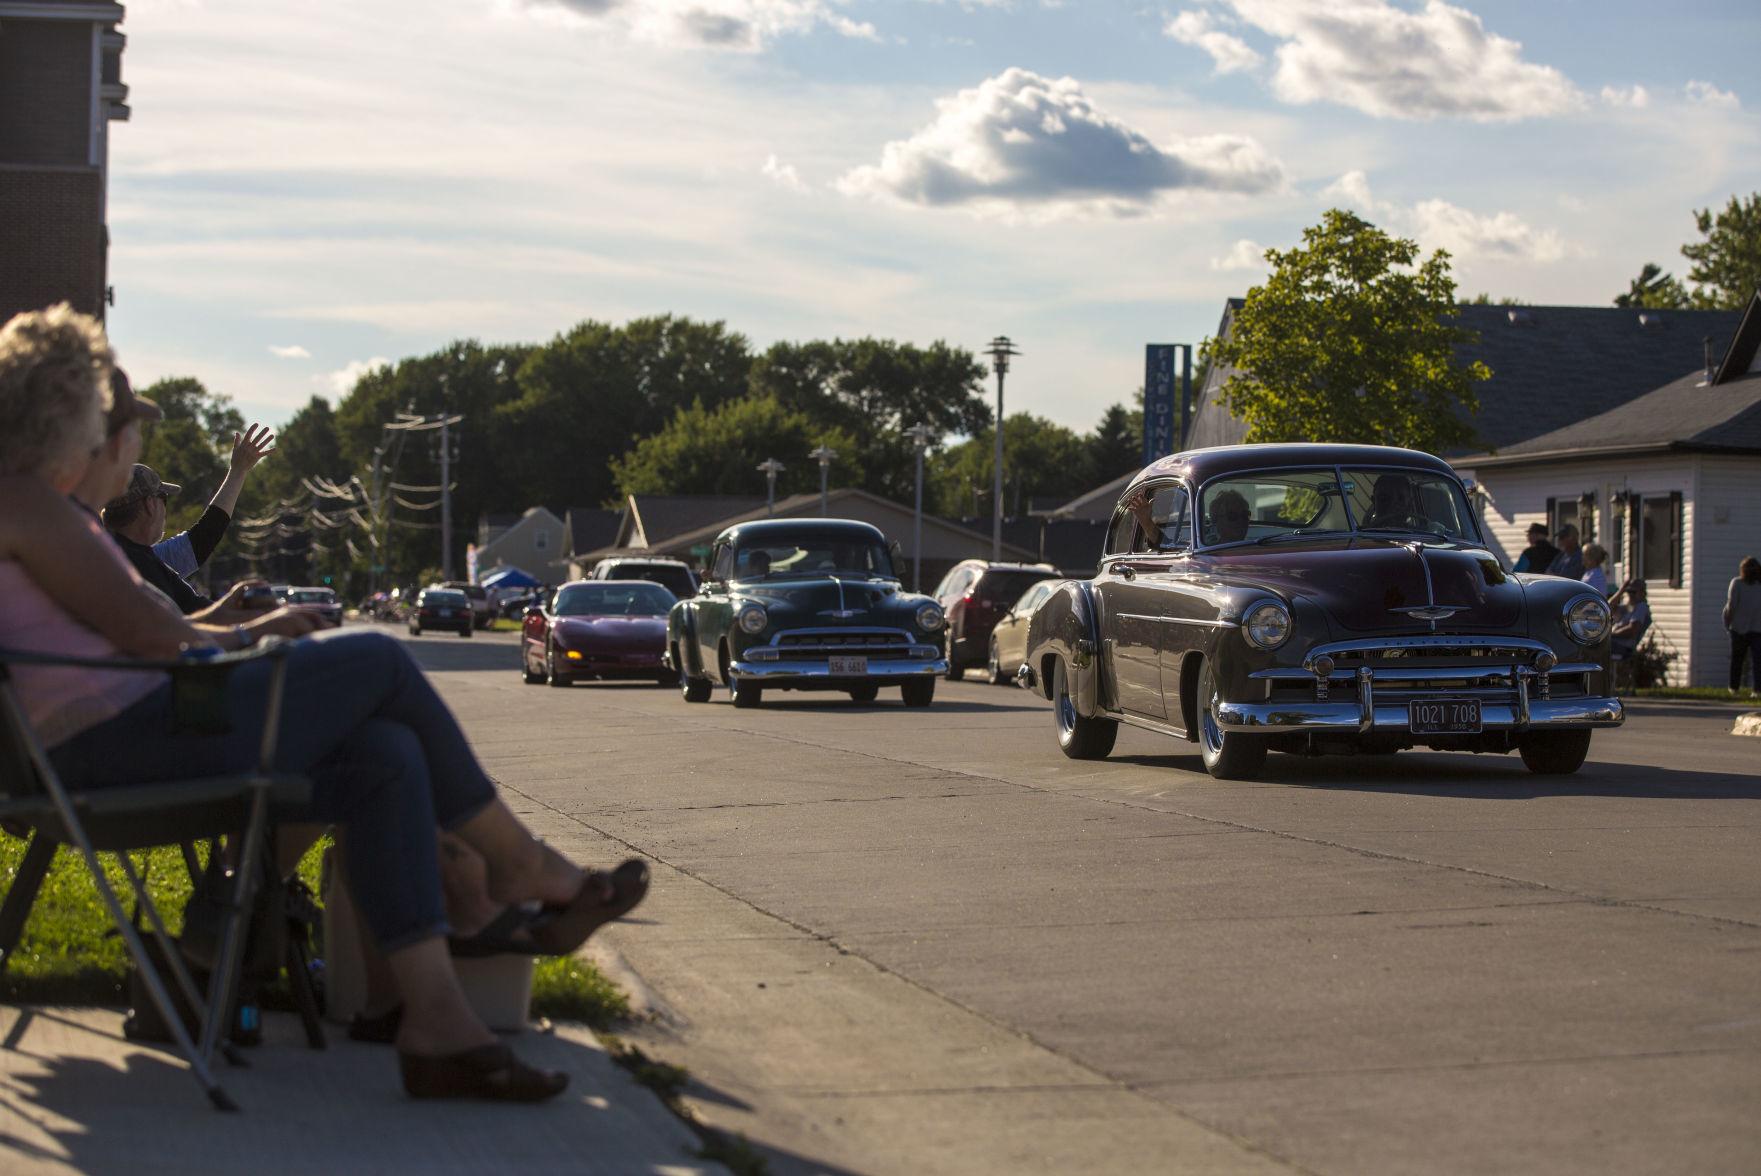 Clear Lake car cruise, show returns for 35th year with hundreds of